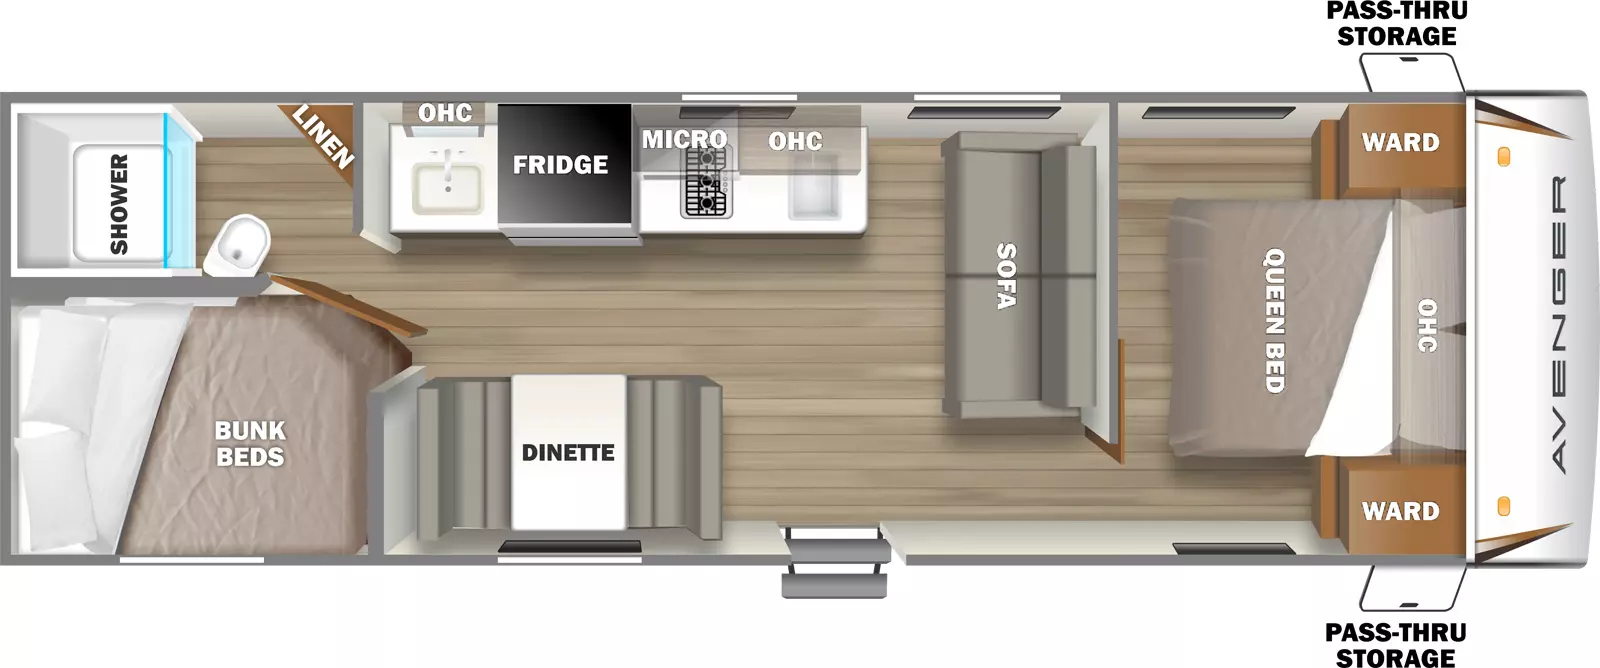 The Avenger 25BH has a single entry door and front pass through storage on the exterior. The interior features front to back include: front queen bed with wardrobes on either side, and overhead cabinets; sofa on interior wall opposite front bedroom; door side, booth dinette; rear bunk beds and bathroom with shower, toilet, and linen closet; off-door side kitchen sink, fridge, microwave, cooktop, and overhead cabinets. 